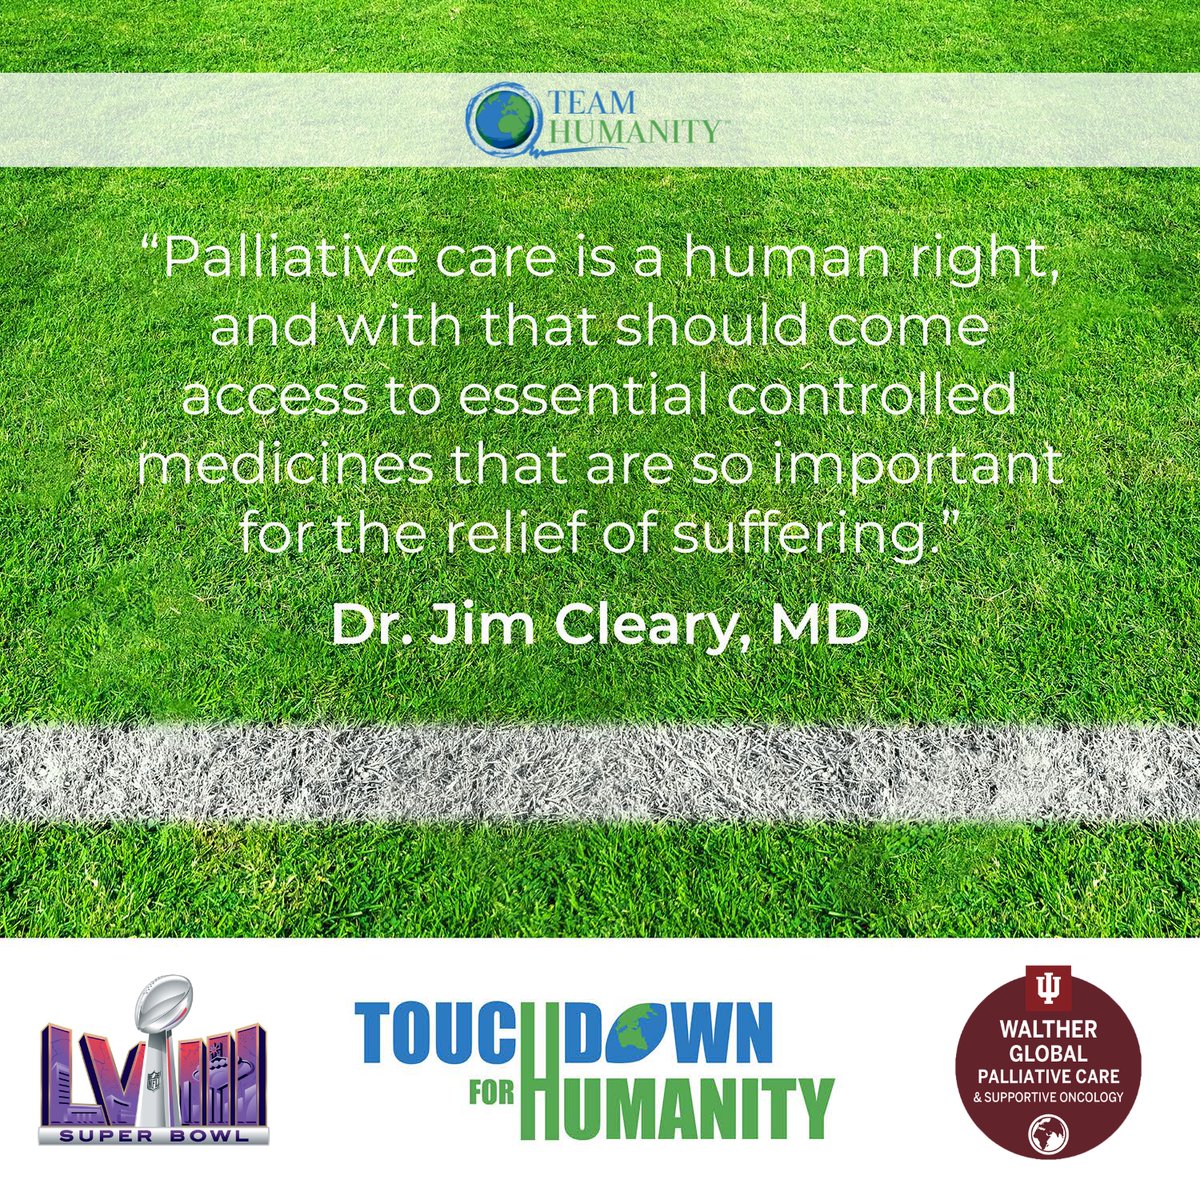 As #SBLVII kicks off with world Champions, we cheer winning #PalliativeCare teams around the 🌎 who uphold #dignity & #HumanRights for all who are part of this Team called Humanity 🎥 bit.ly/3uzE0Eo @NFLAlumni @shannonsharpe @TurnerSportsEJ @CBSports @FirstTake @DrTedros